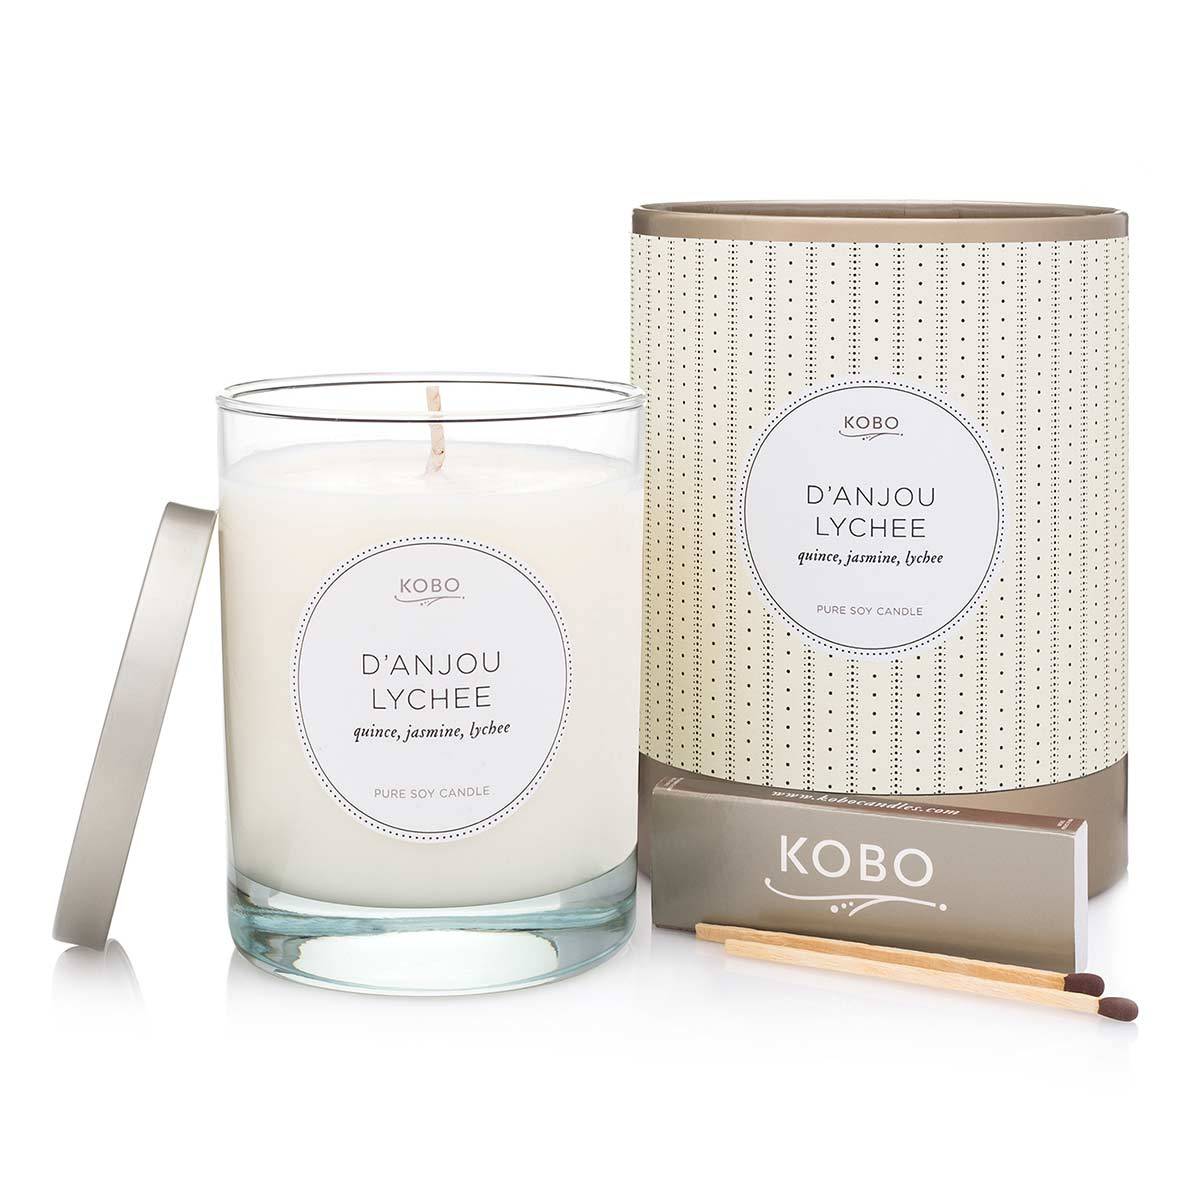 Primary image of D'Anjou Lychee Candle